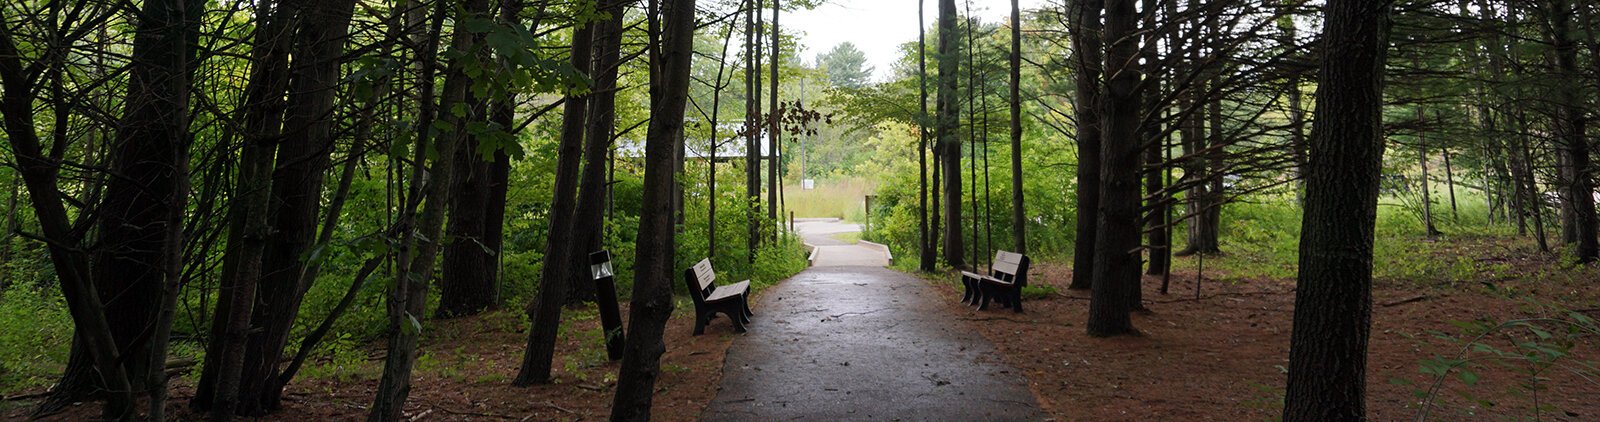 The Great Lakes Bay Region is home to many diverse and beautiful hiking trails, including the Chippewa Nature Center, pictured here.